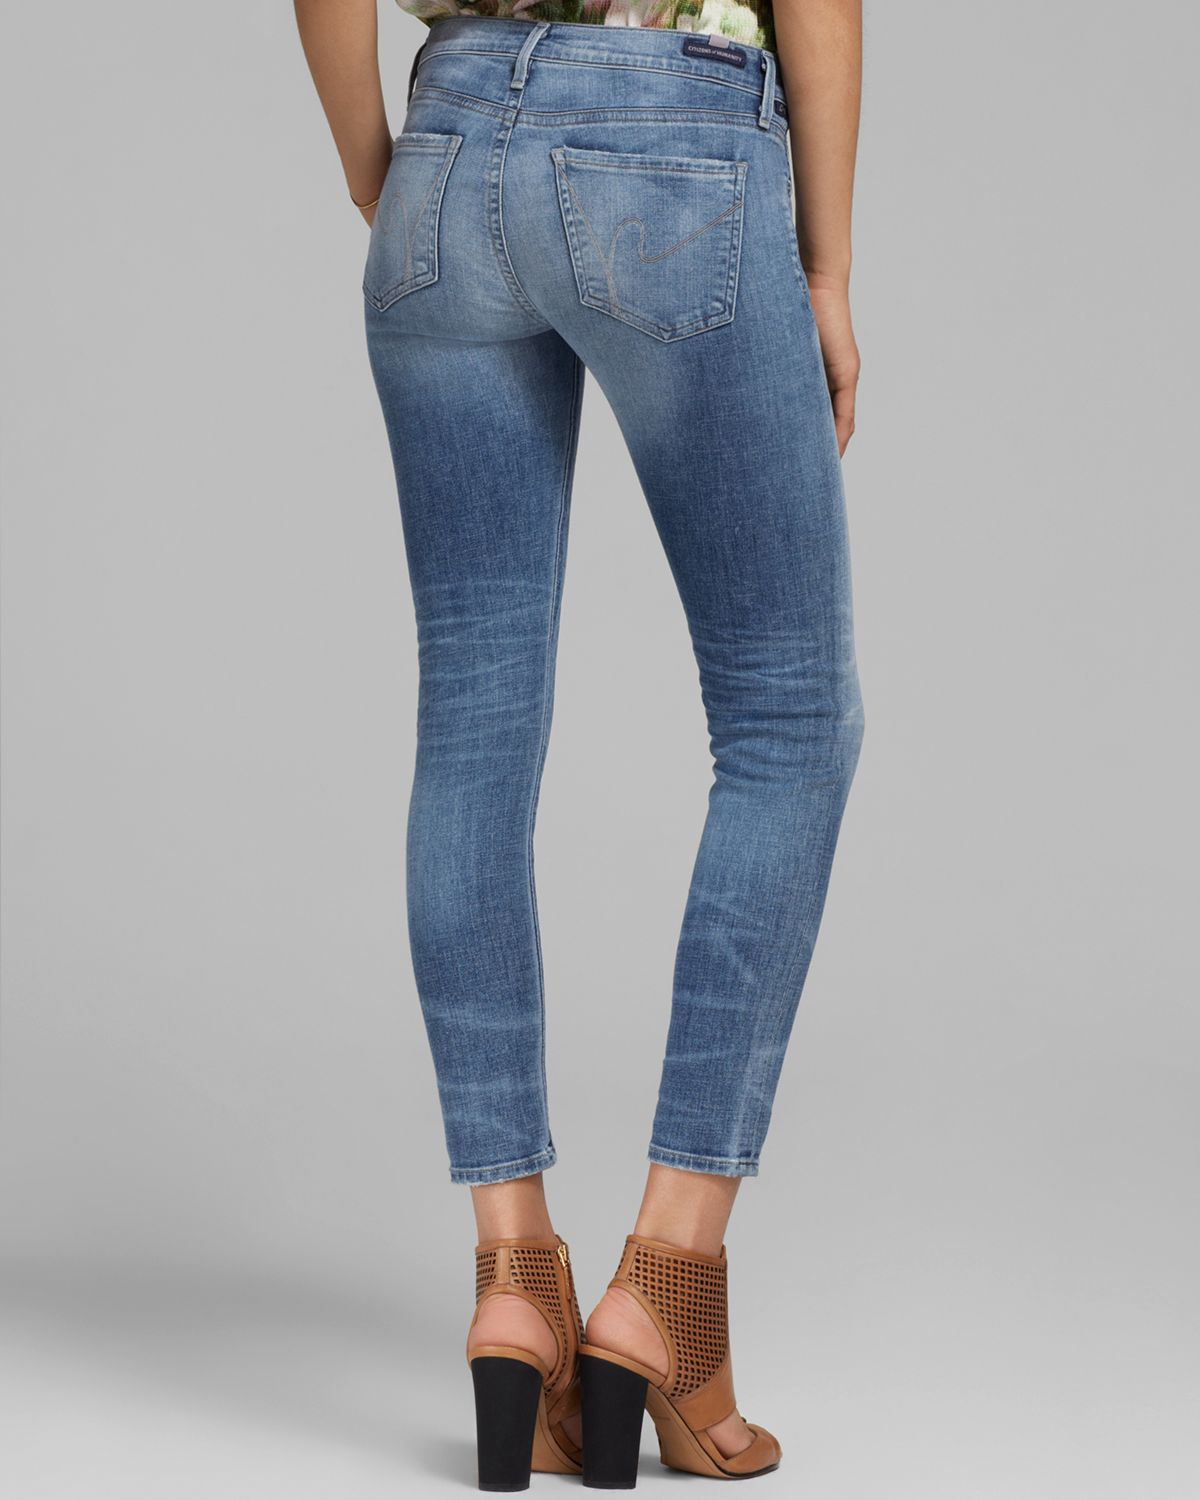 Lyst - Citizens Of Humanity Jeans - Avedon Ankle Skinny In Belize in Blue